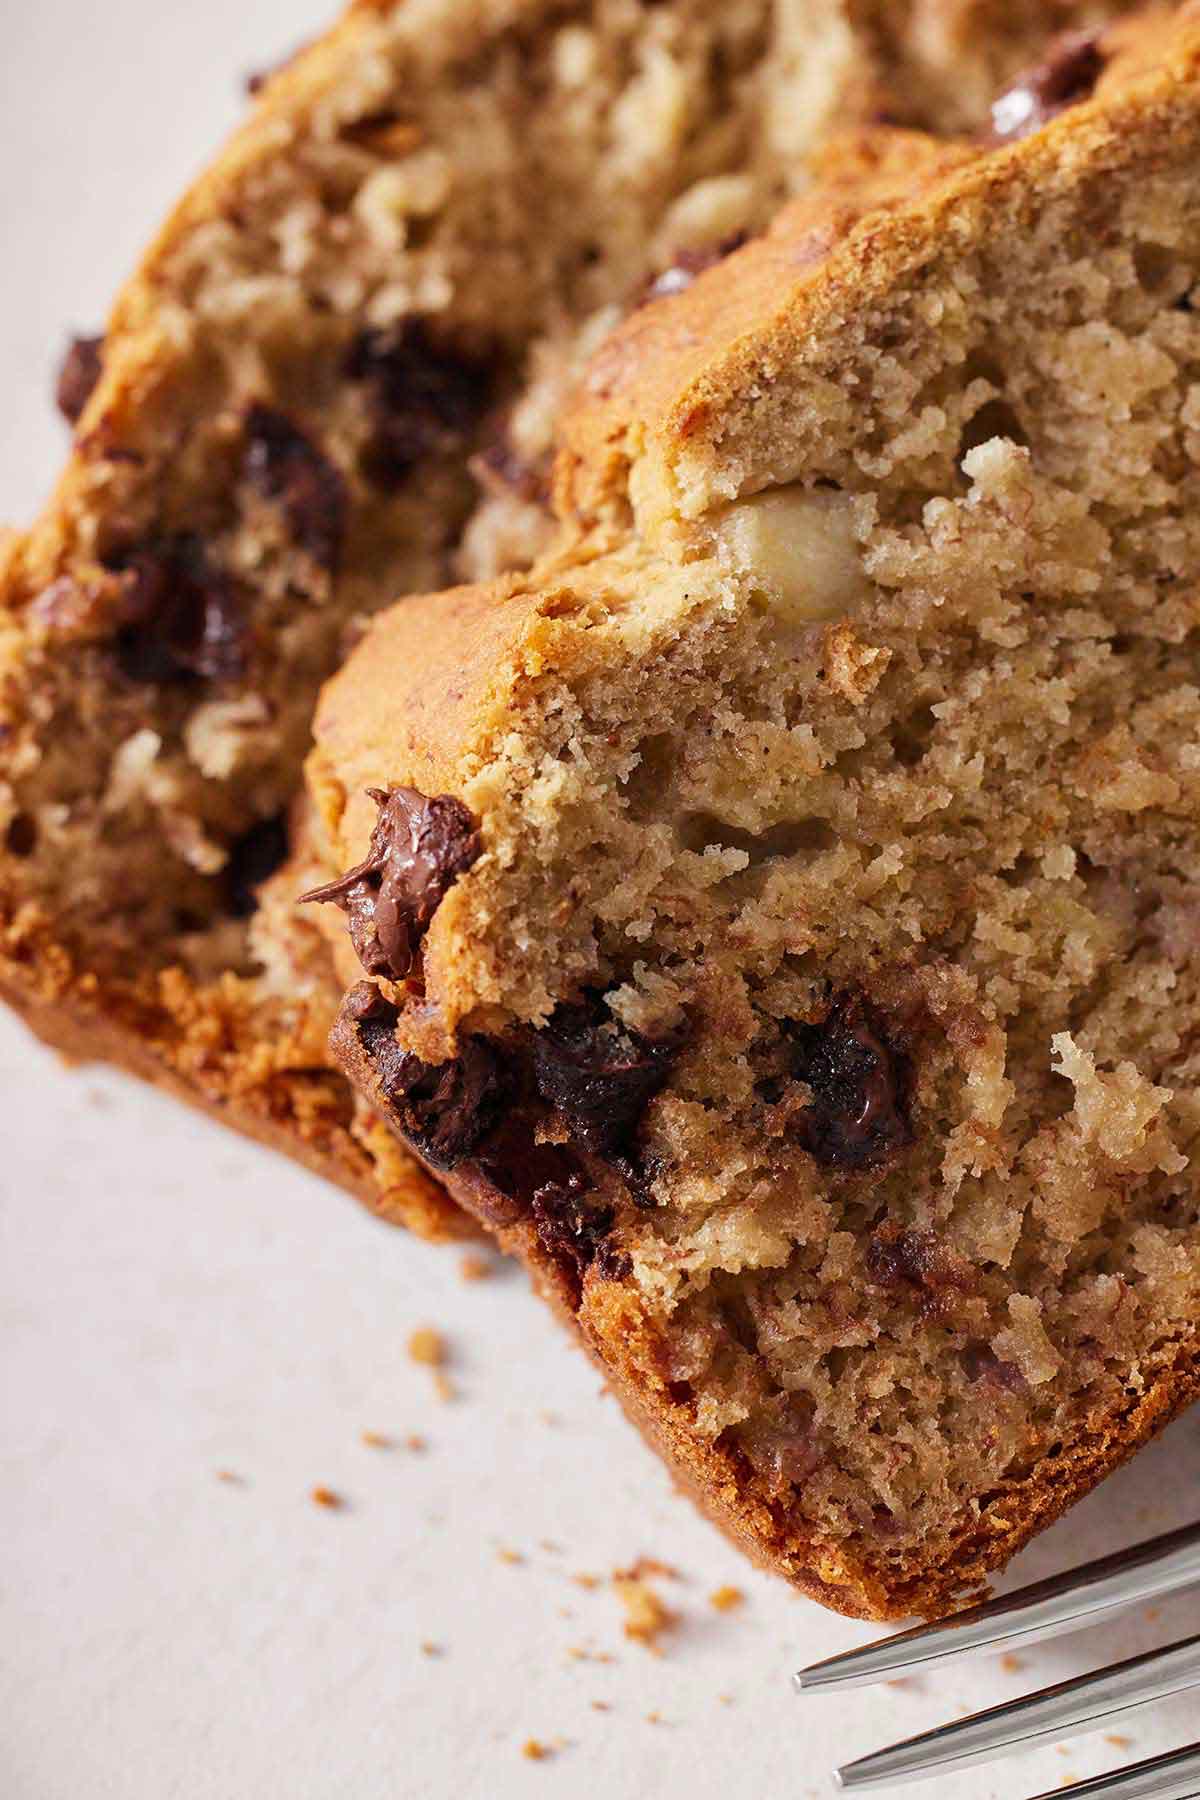 Close up view of two slices of gluten free chocolate chip banana bread, highlighting the moist and tender crumb.